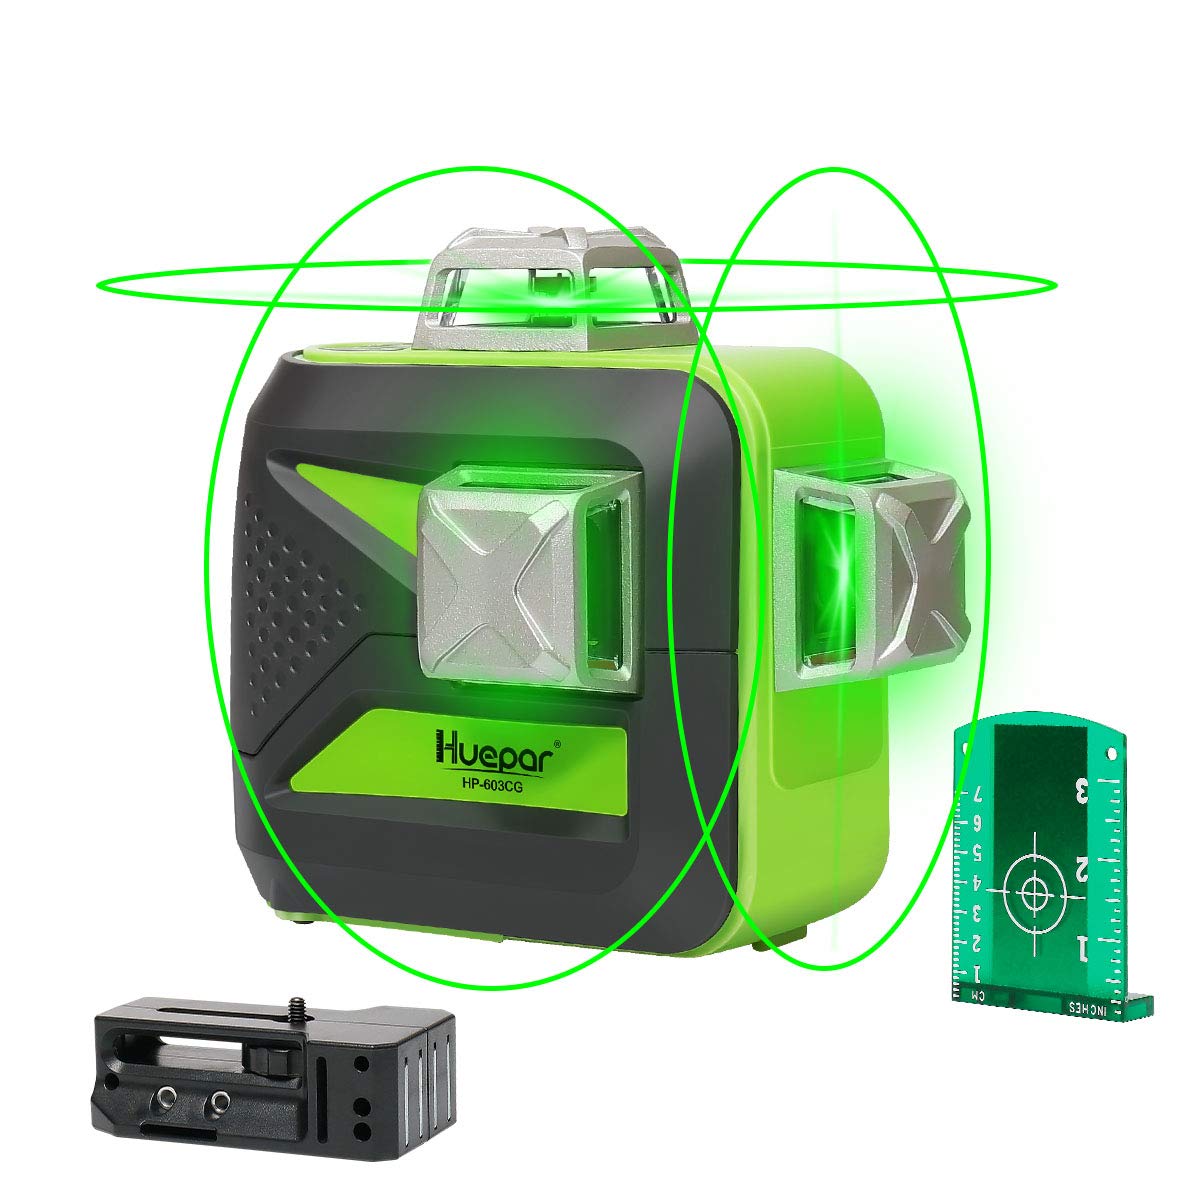 Huepar 3D Green Beam Self-Leveling Laser Level 3x360 Cross Line Laser Three-Plane Leveling and Alignment Line Laser Level -Two 360° Vertical and One 360° Horizontal Line -Magnetic Pivoting Base 603CG